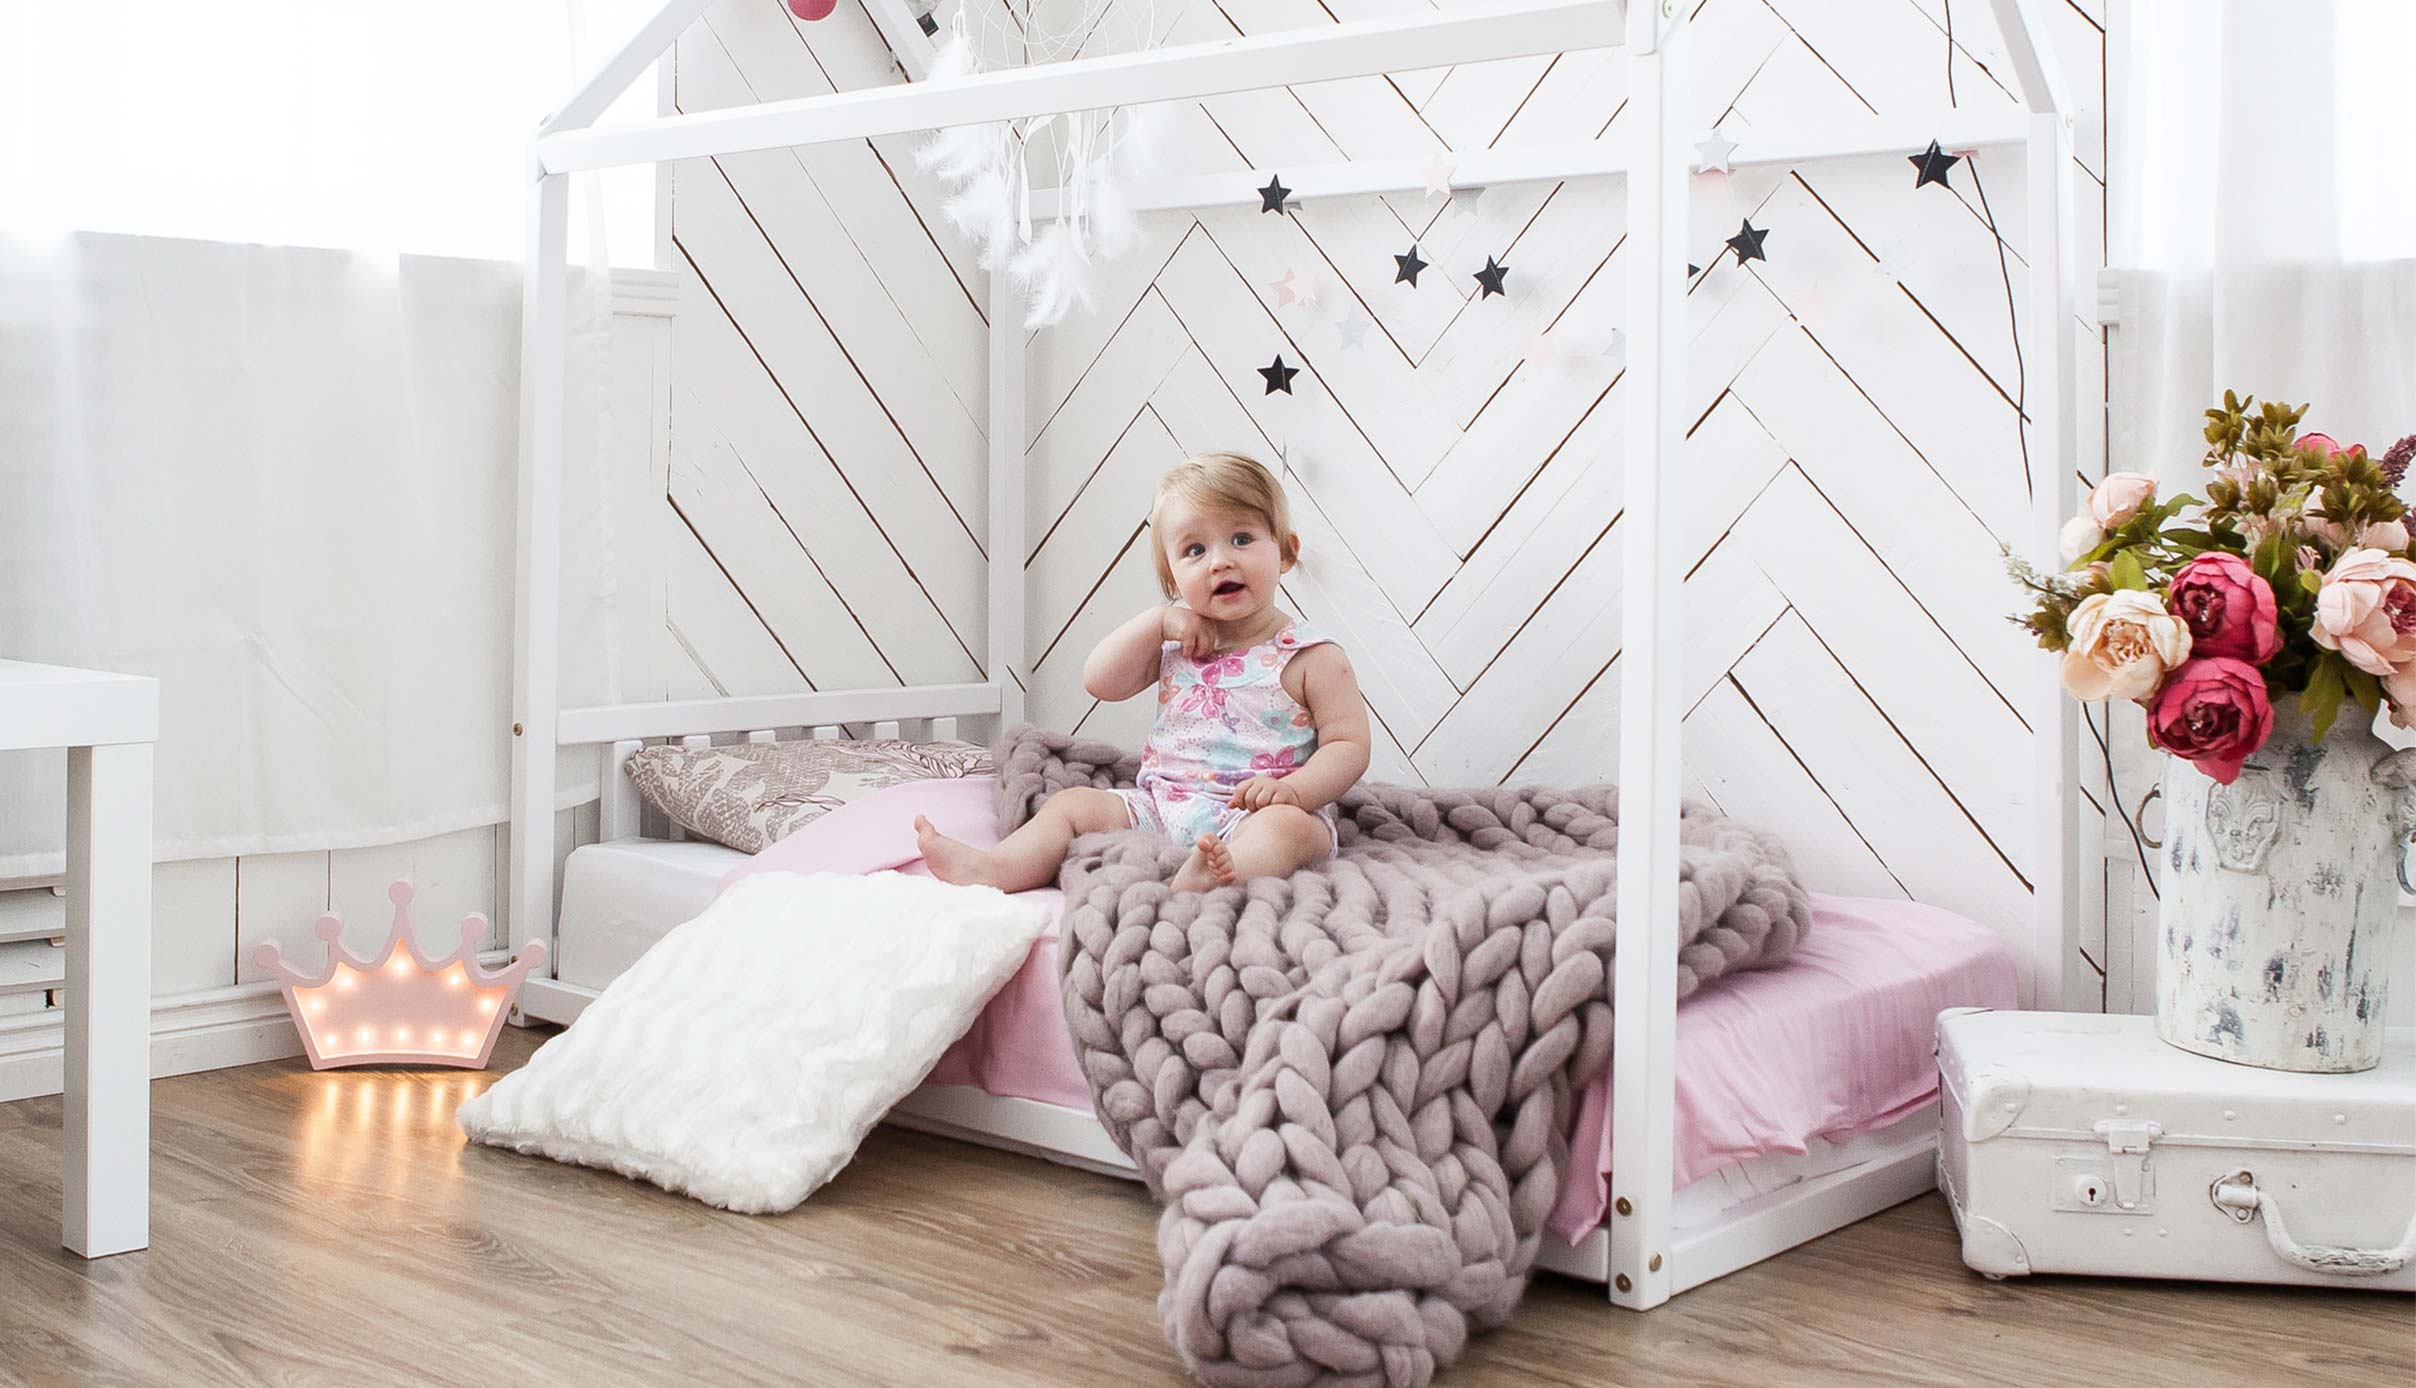 A little girl is sitting on a bed in a pink and white room.